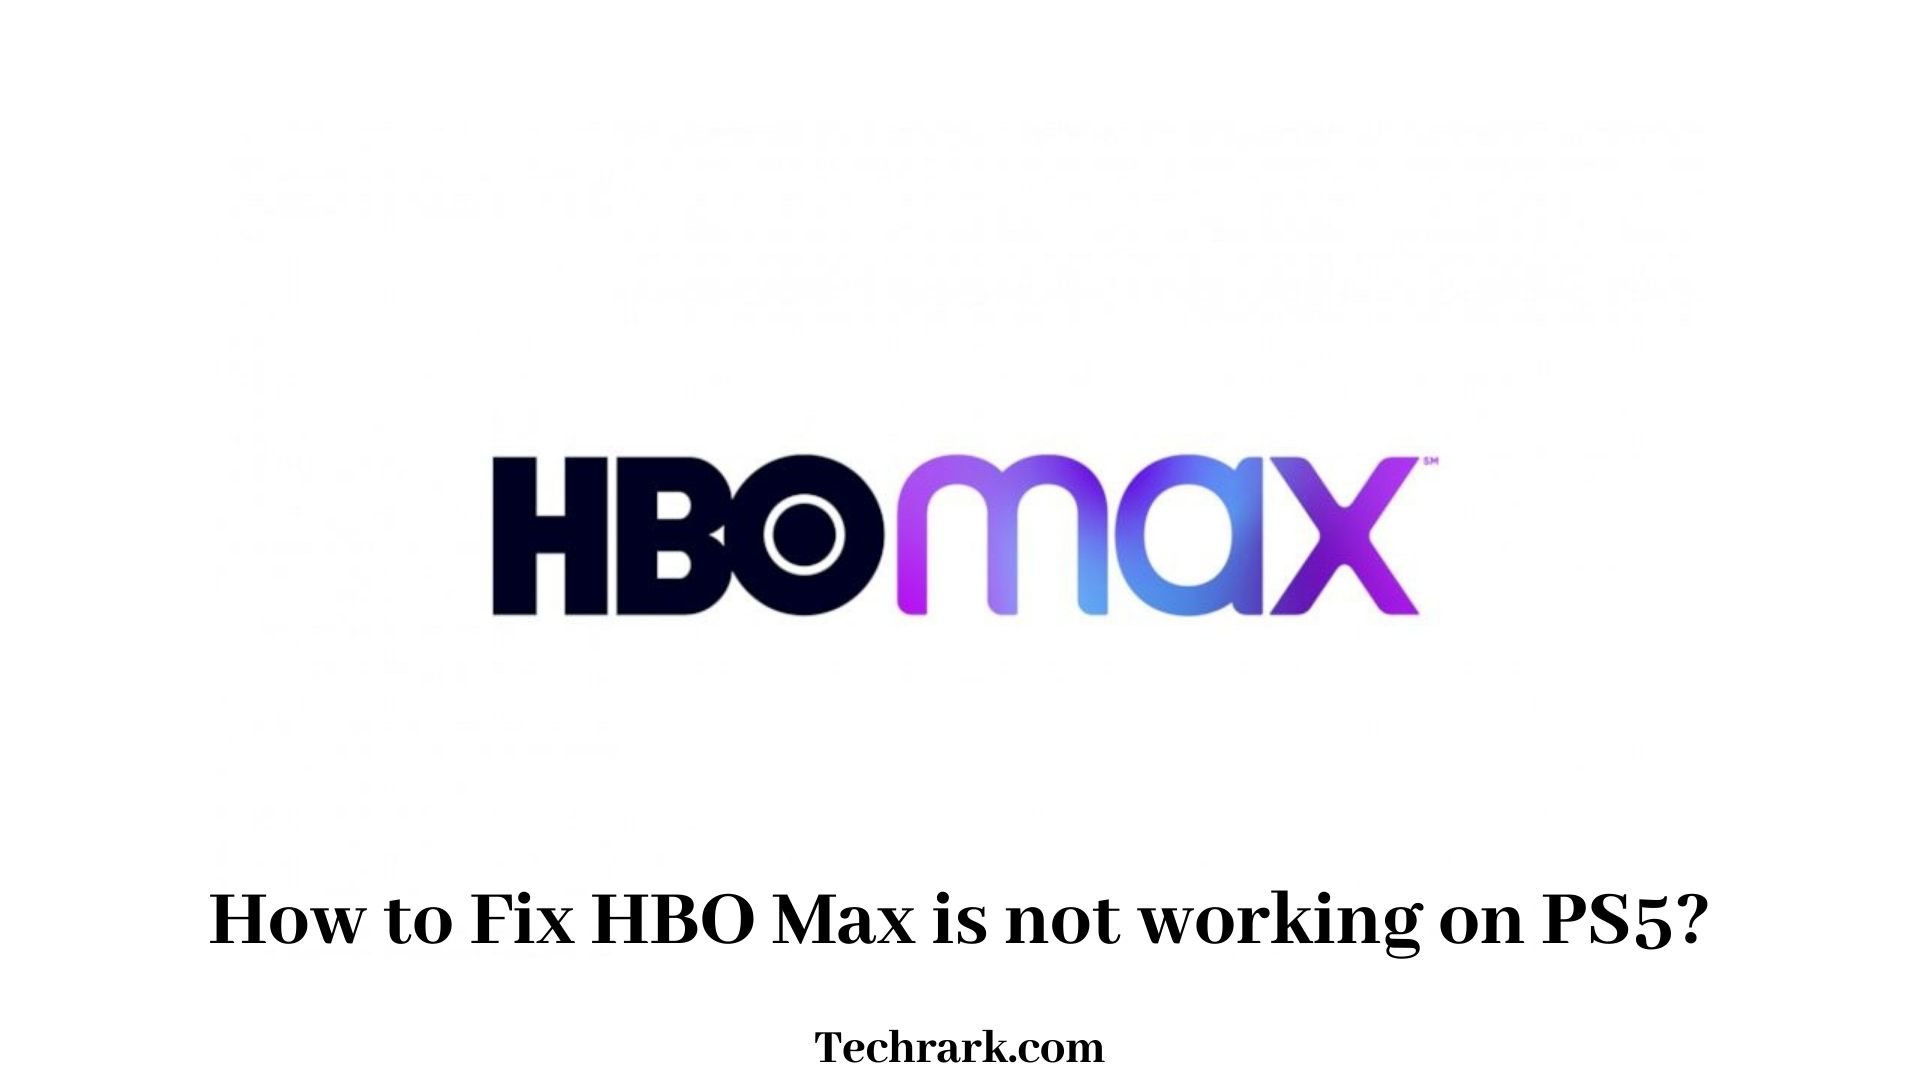 HBO Max is not working on PS5